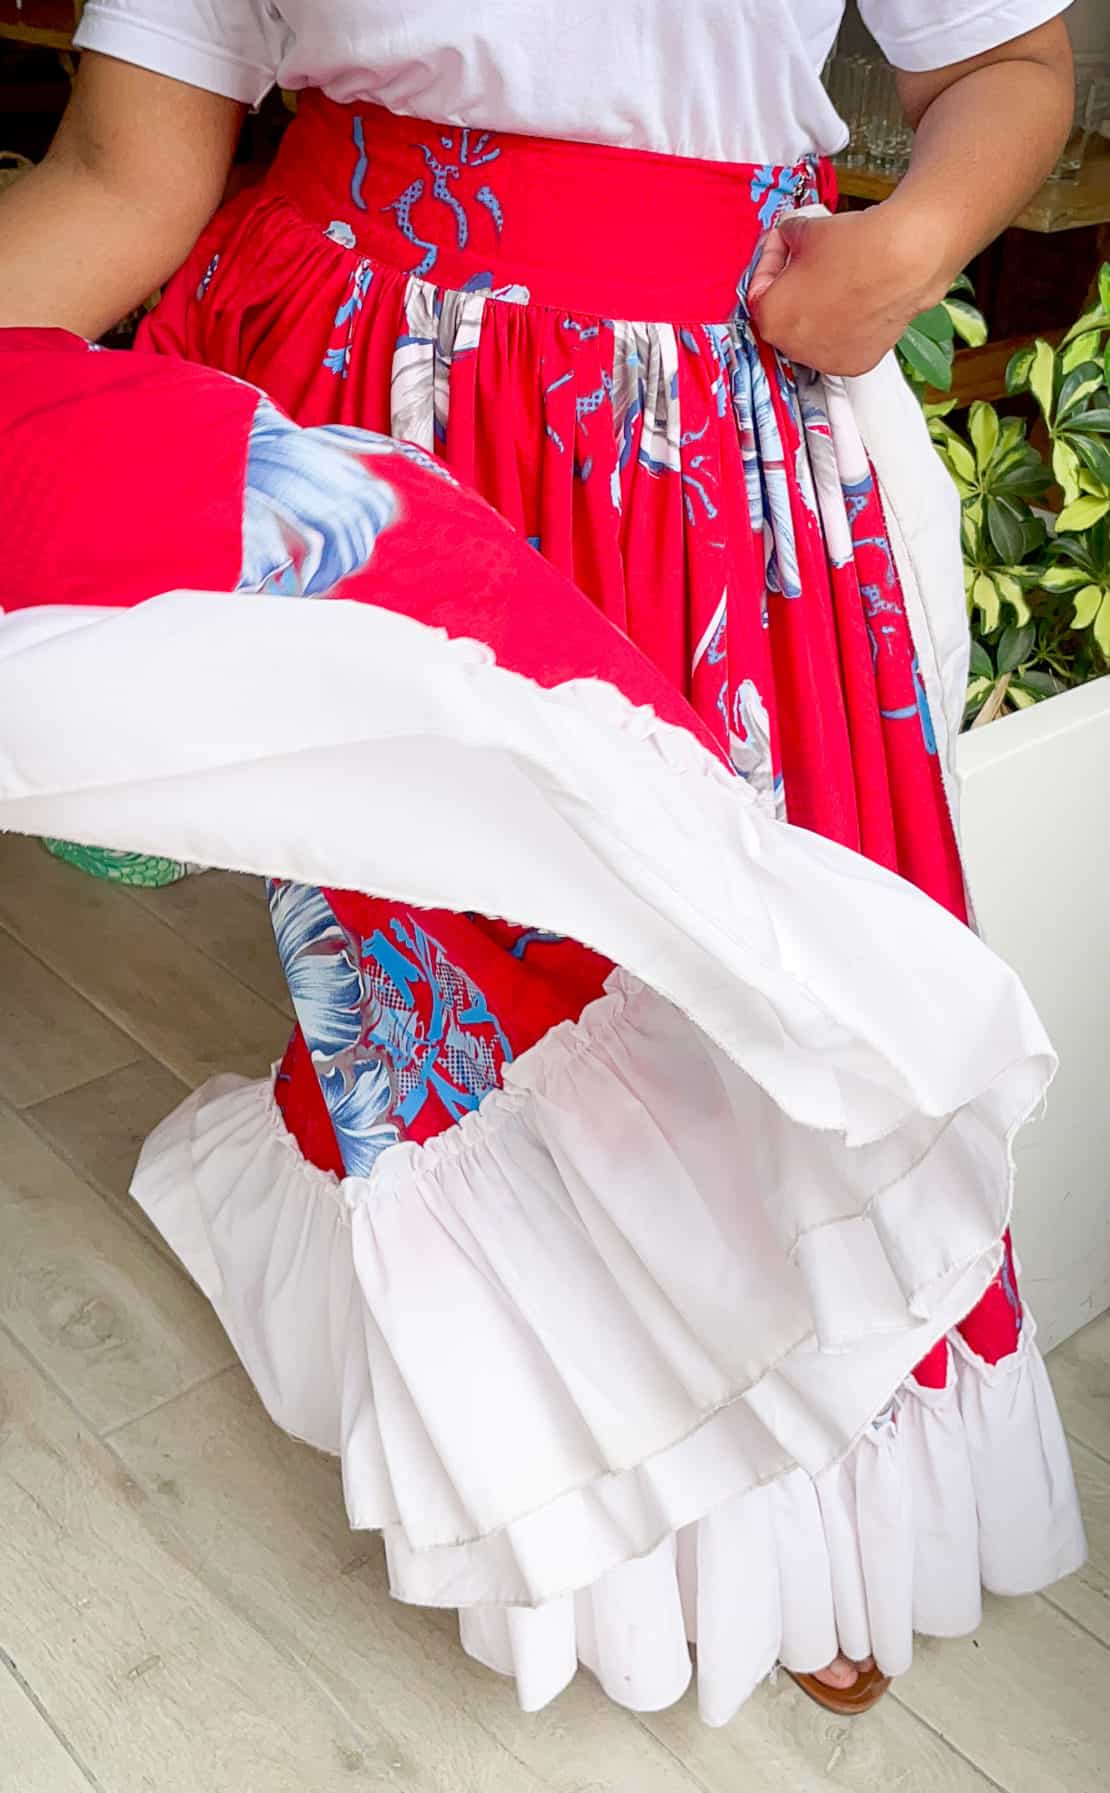 A woman swirls her skirt during a traditional performance of the Sega dance in Mauritius